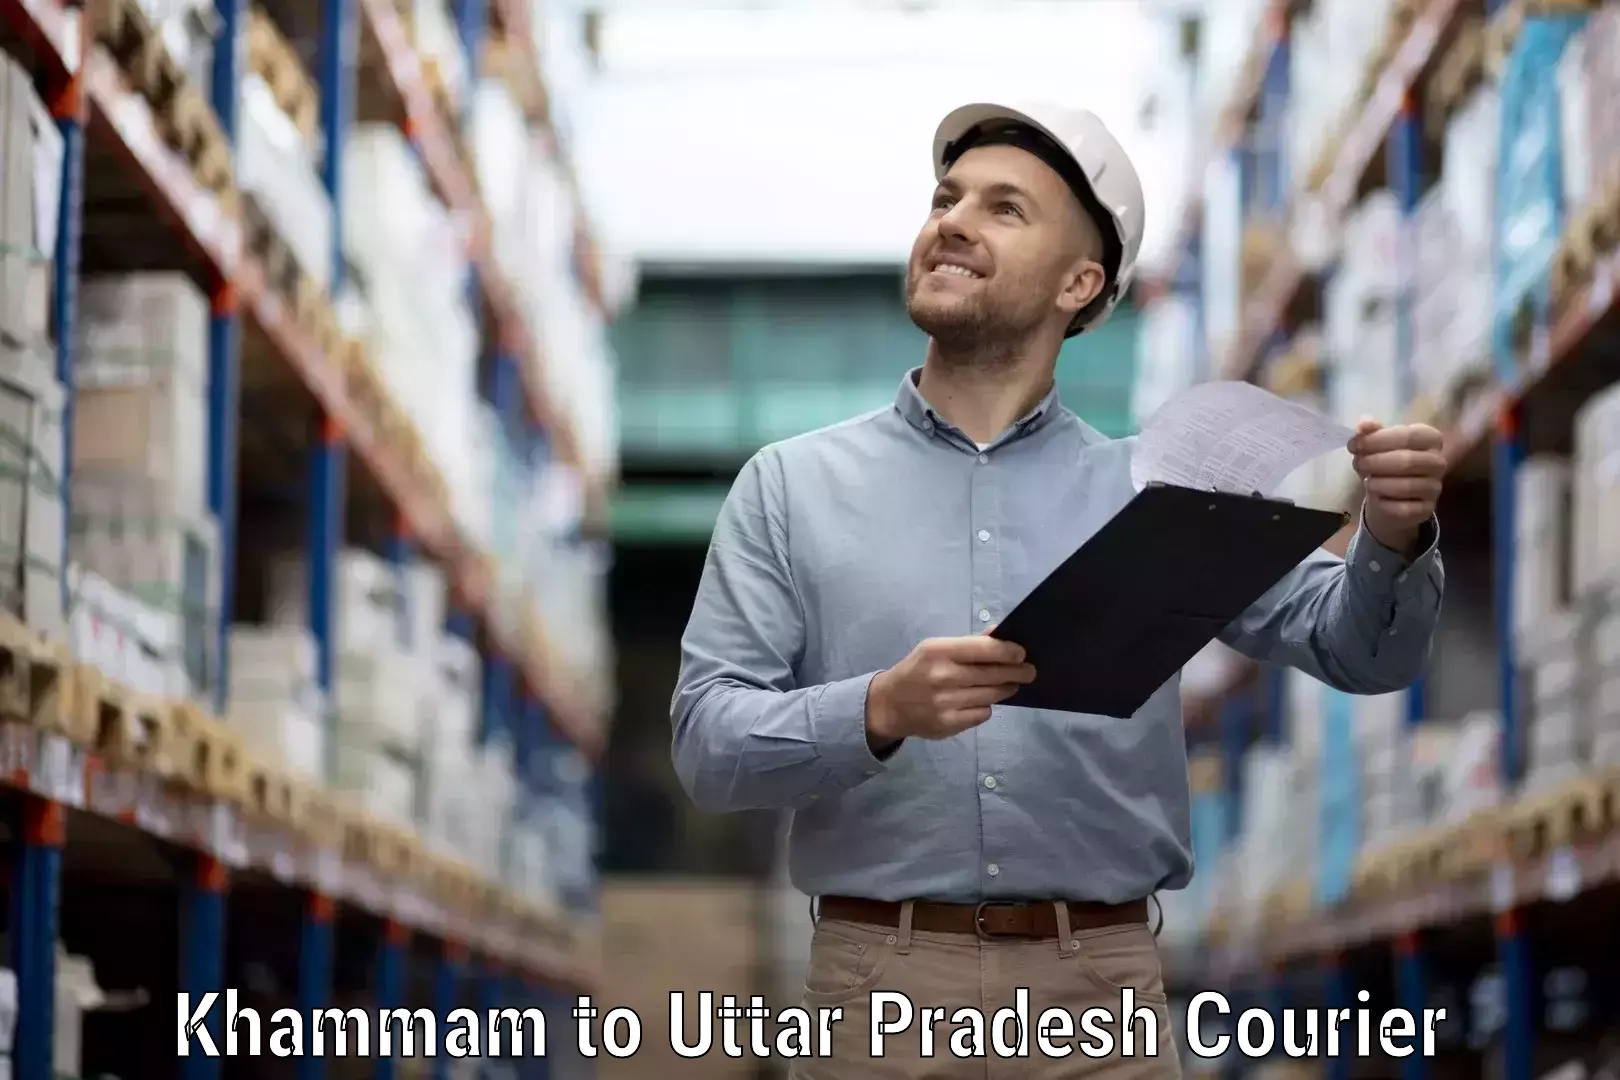 Global parcel delivery Khammam to Ghaziabad